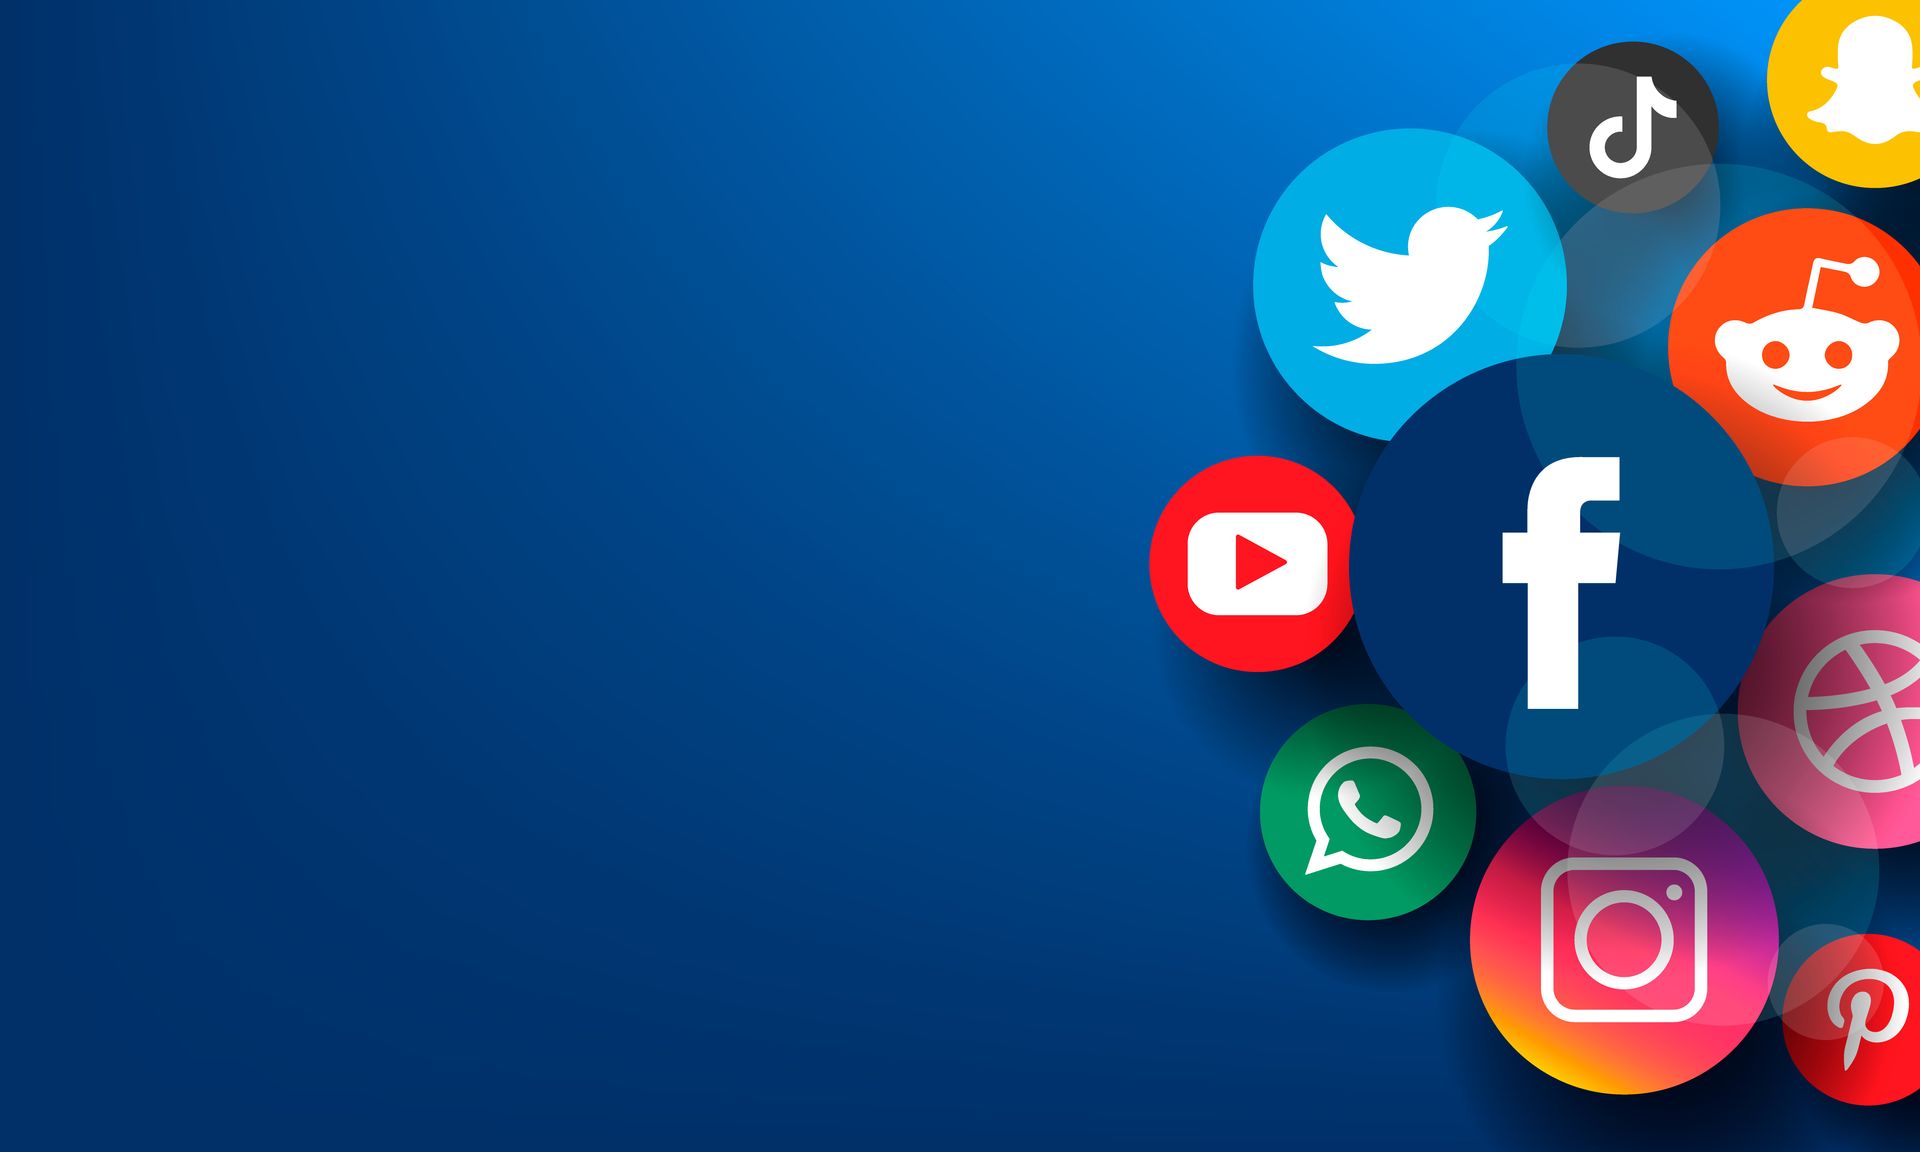 Social media icons on blue background